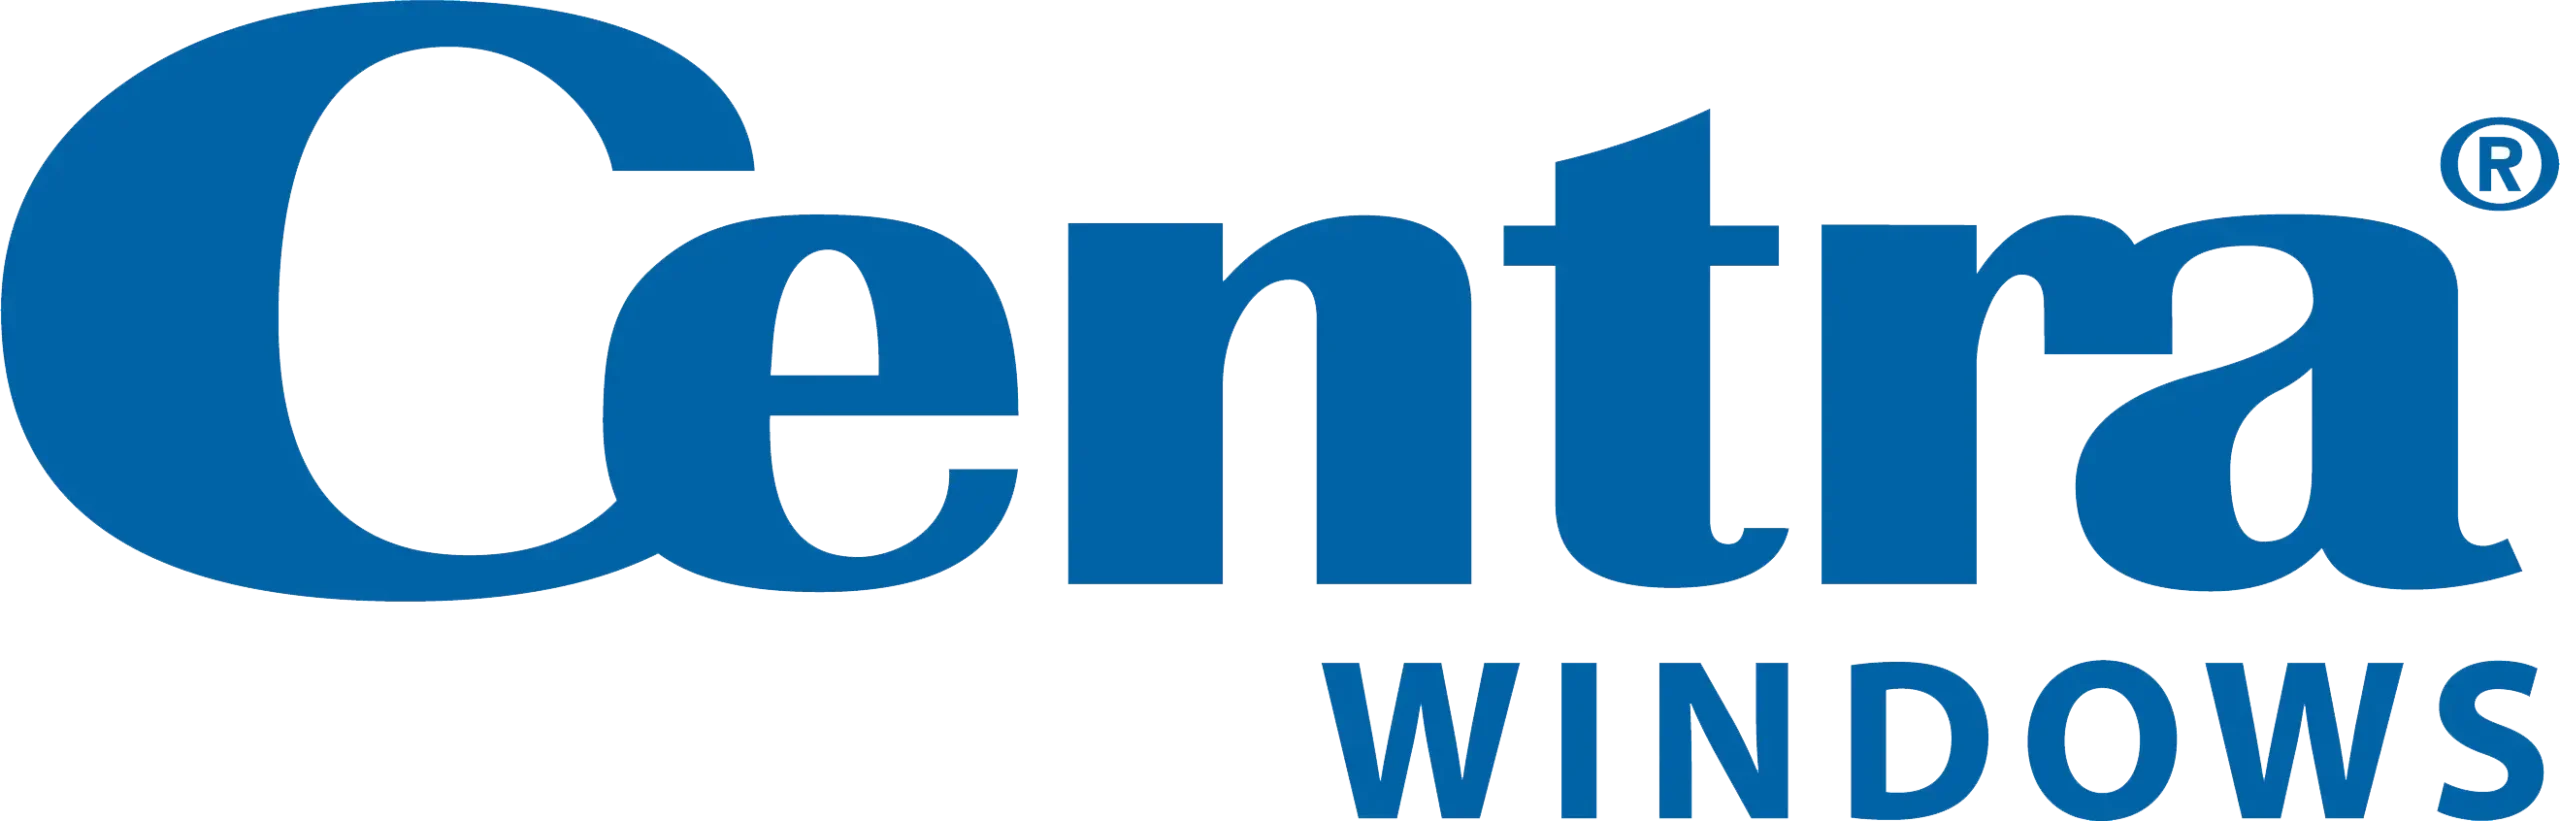 Centra Windows Review: Ultimate AI Analysis Provided Unexpected Results